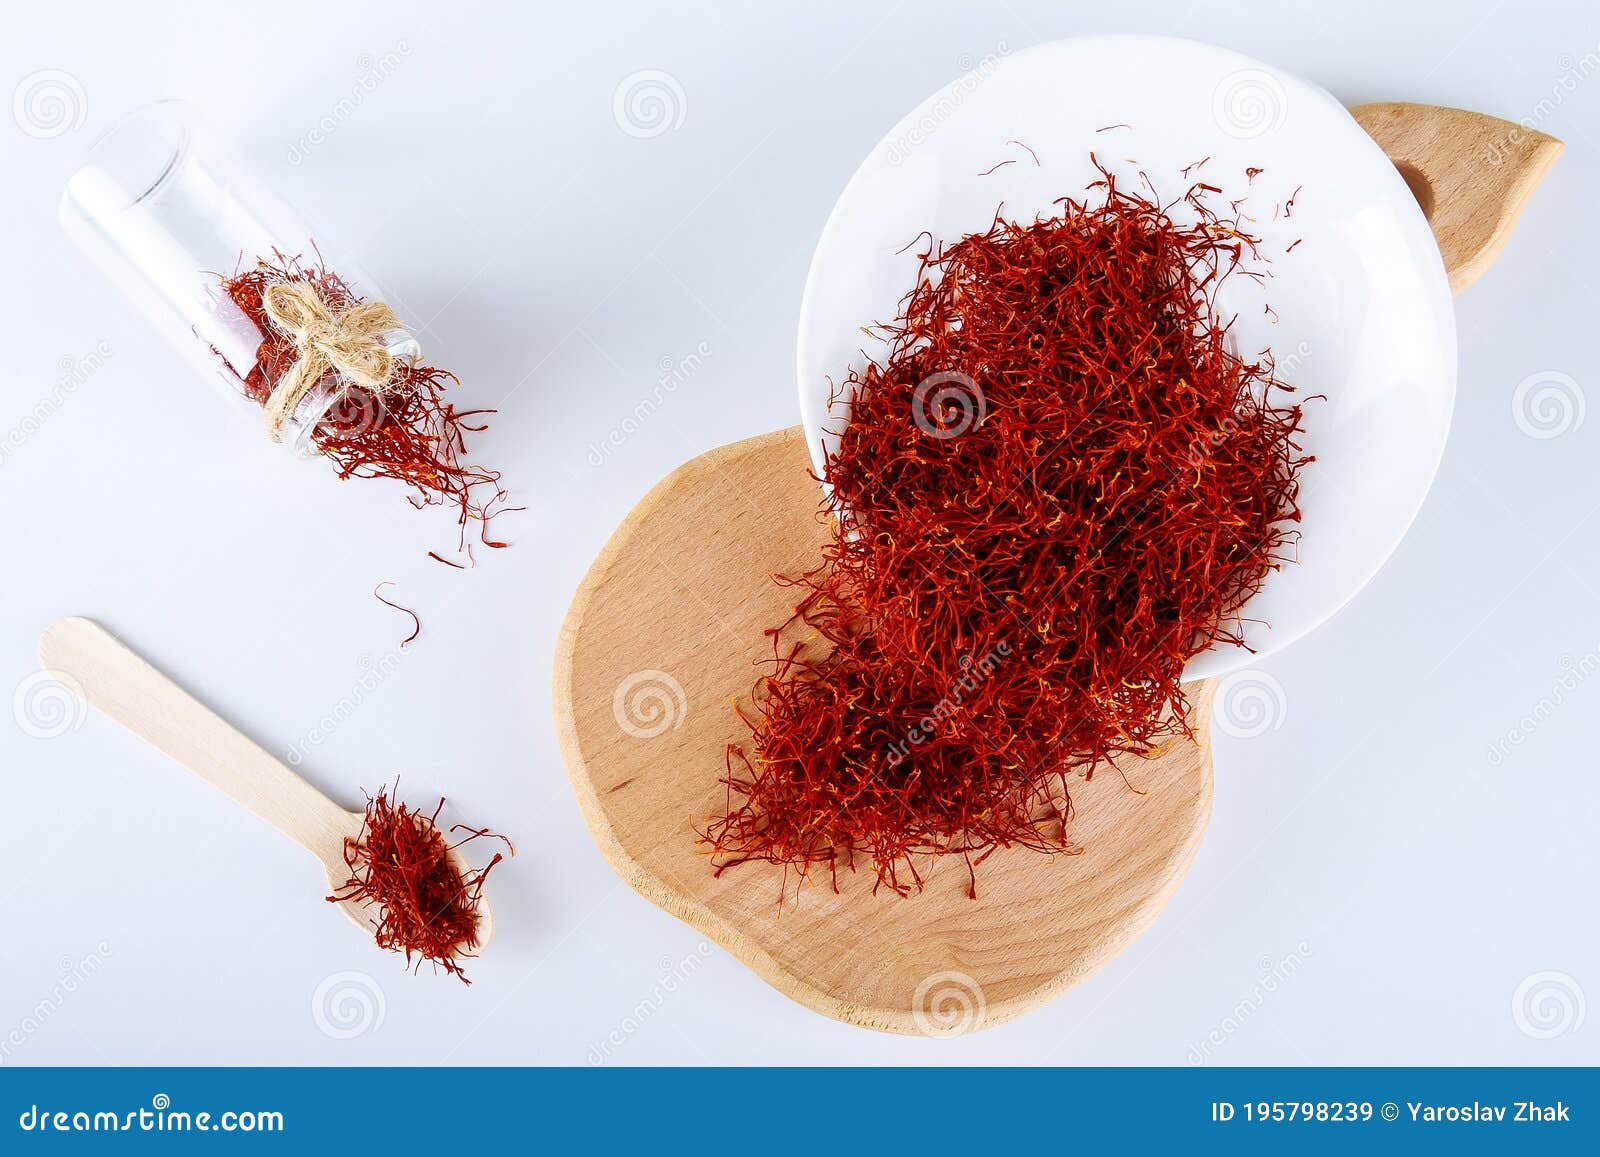 dry saffron spice on plate on white background. wooden board. the use of saffron in cooking, medicine, cosmetology